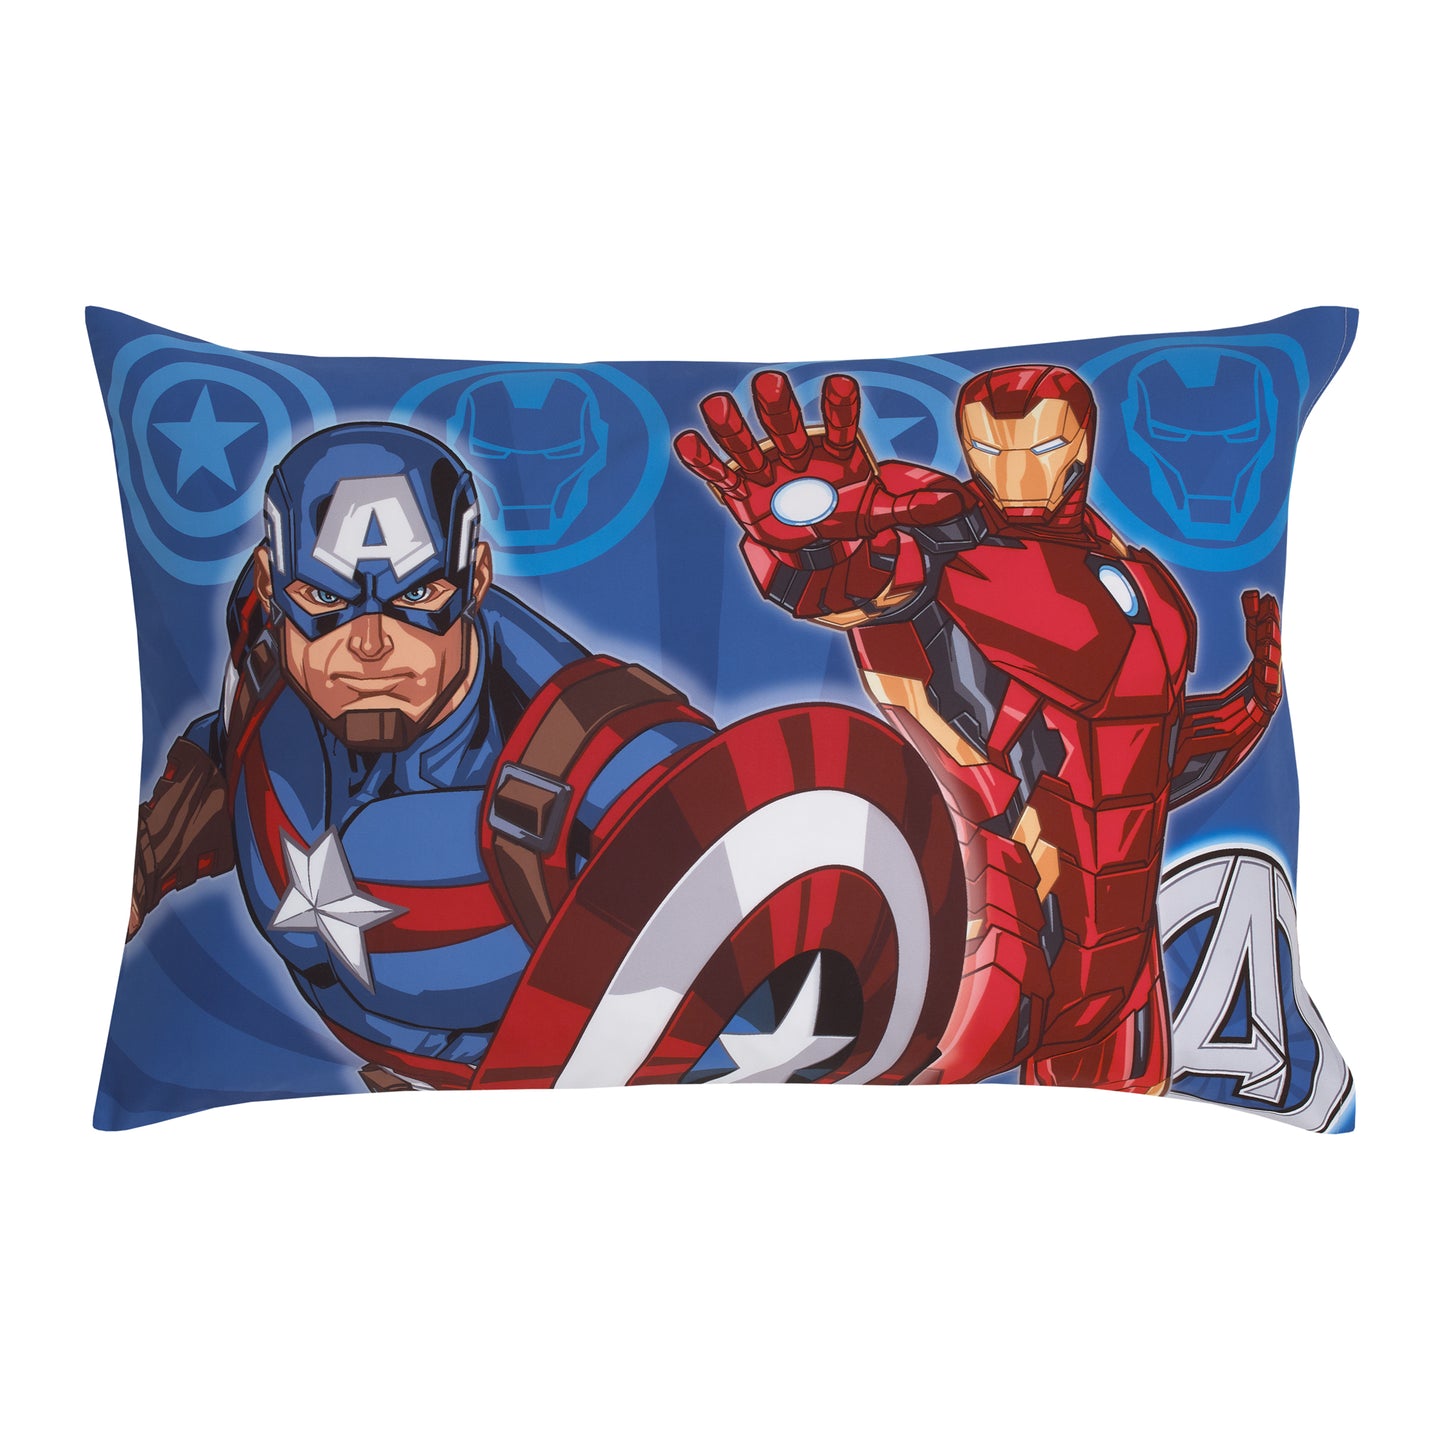 Marvel Avengers Team Blue, Red, and Green Hulk, Captain America, Iron Man, and Thor 4 Piece Toddler Bed Set - Comforter, Fitted Bottom Sheet, Flat Top Sheet, and Reversible Pillowcase